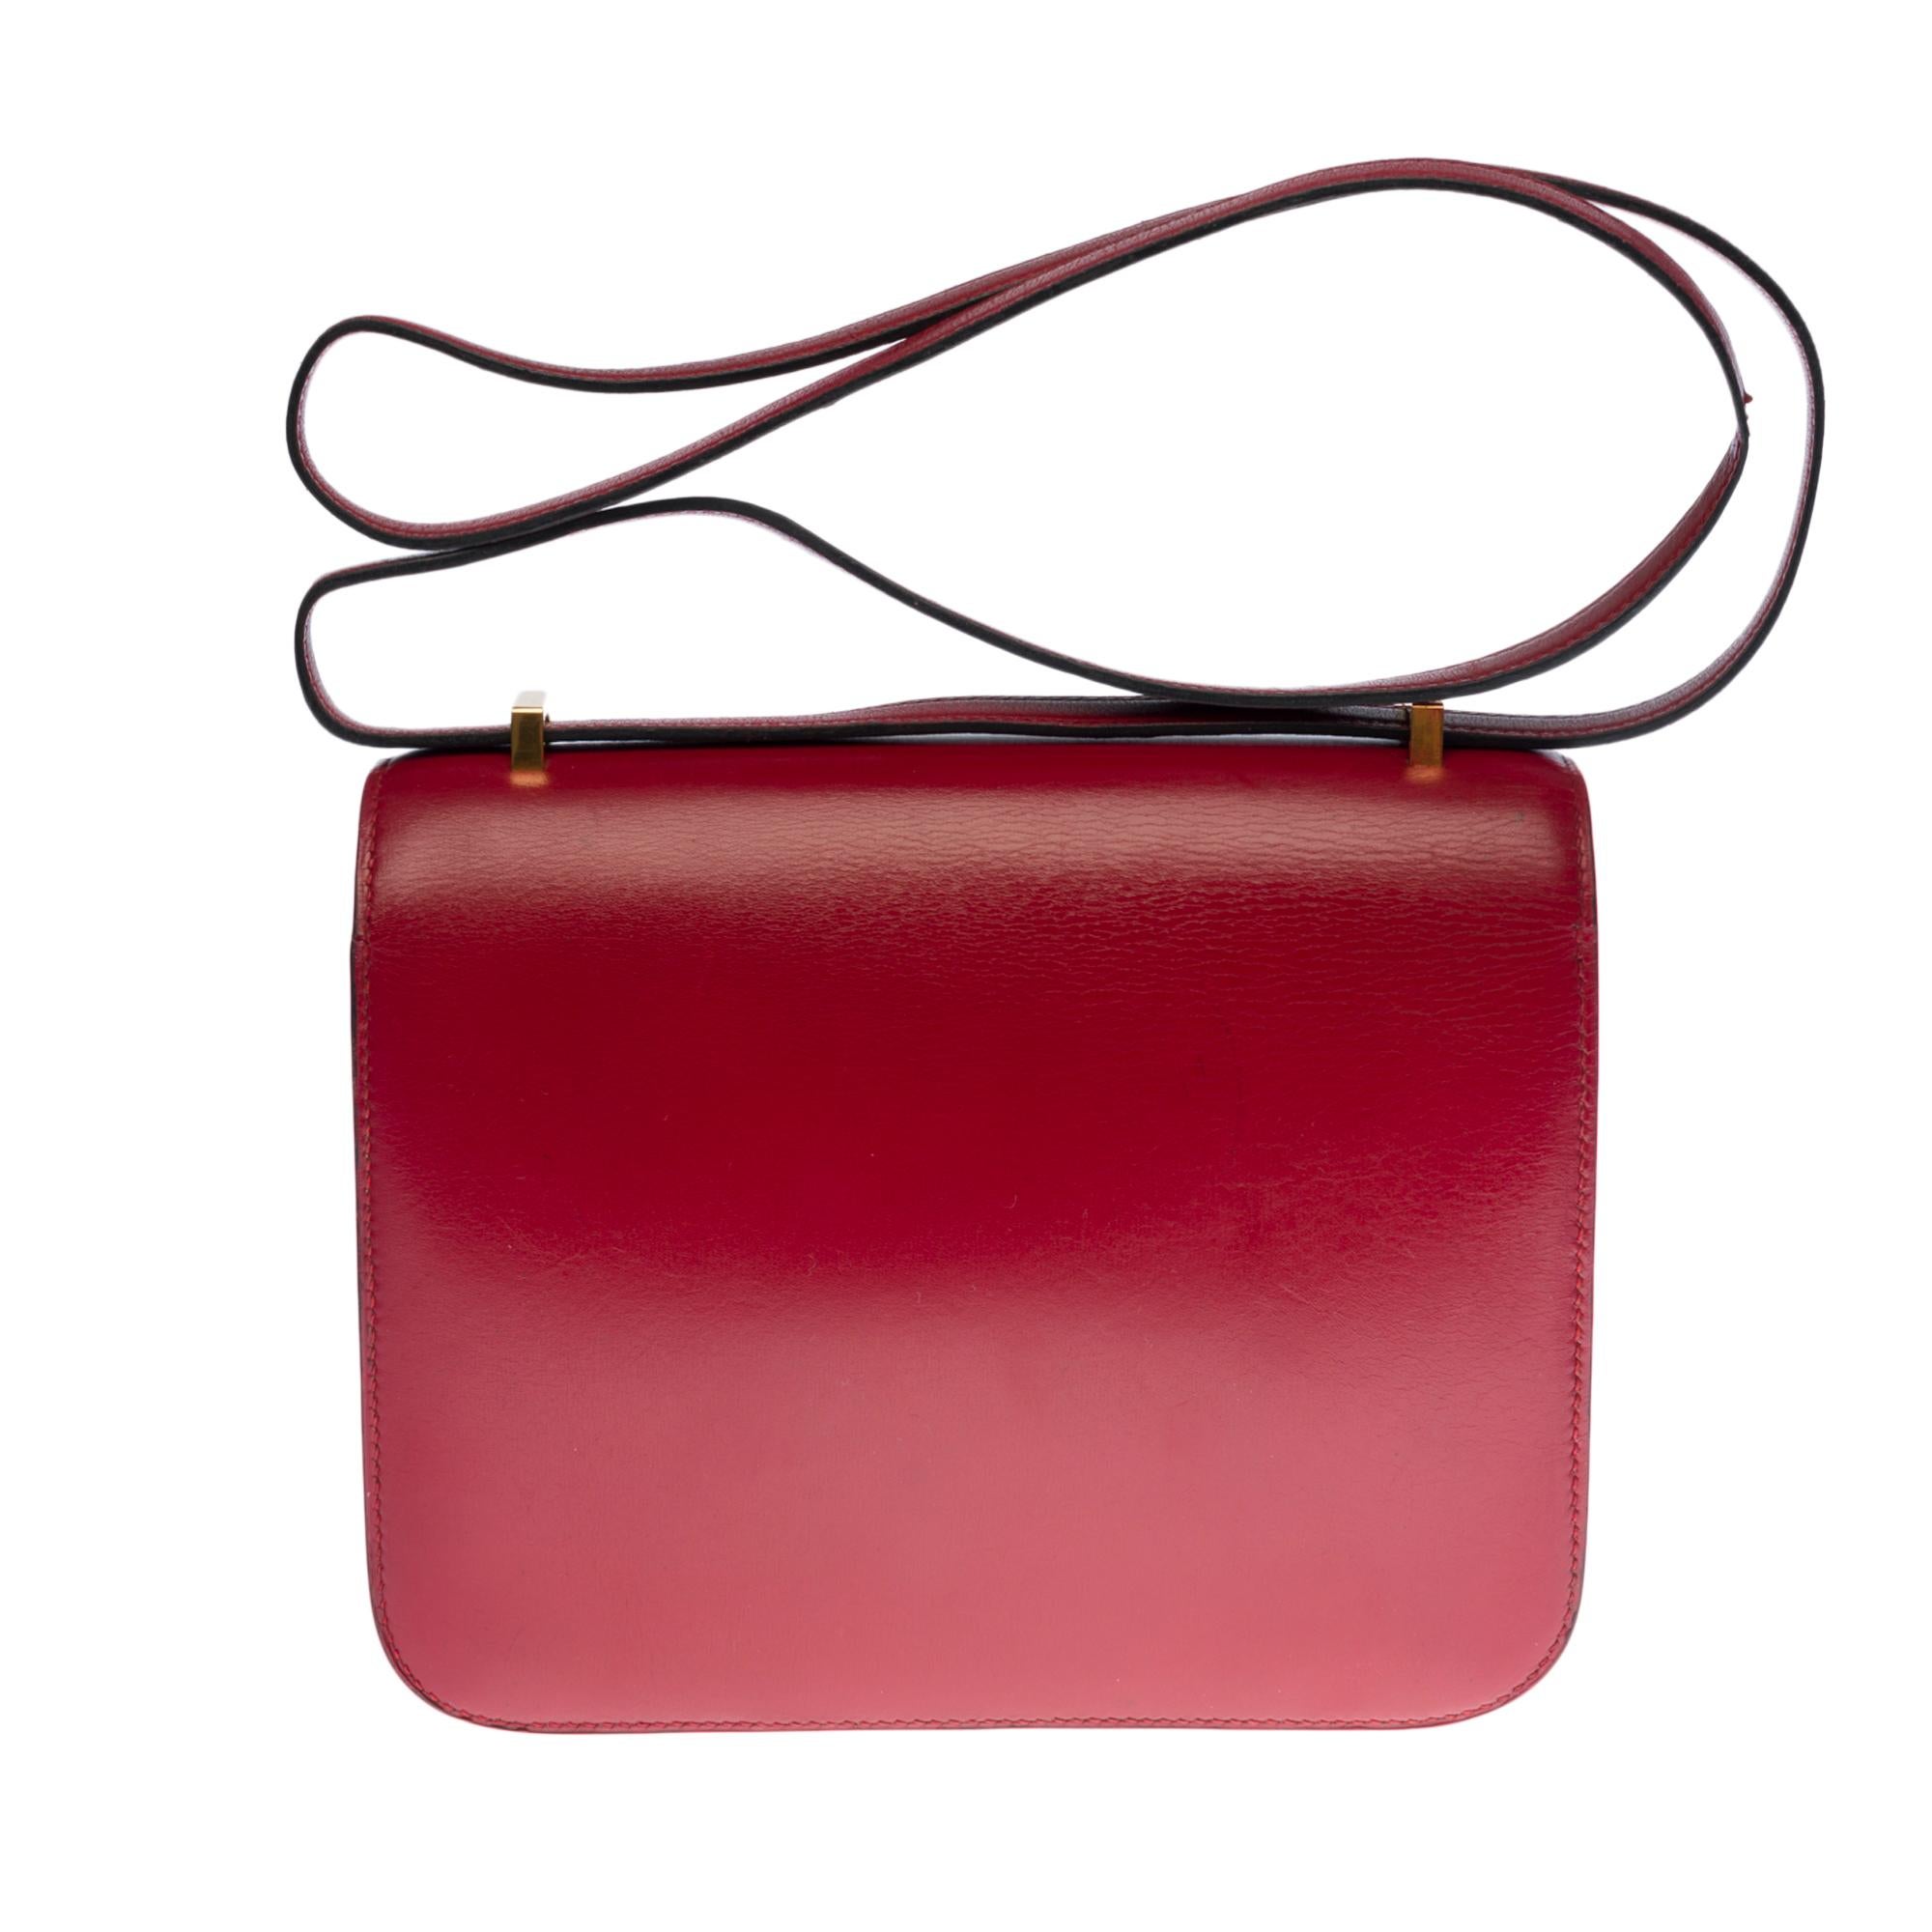 Splendid & Rare Hermès Constance Mini shoulder bag in burgundy calf box leather (Rouge H), gold plated metal hardware, a shoulder strap in burgundy leather box allowing a shoulder or crossbody

Logo closure on flap
Burgundy leather lining, two